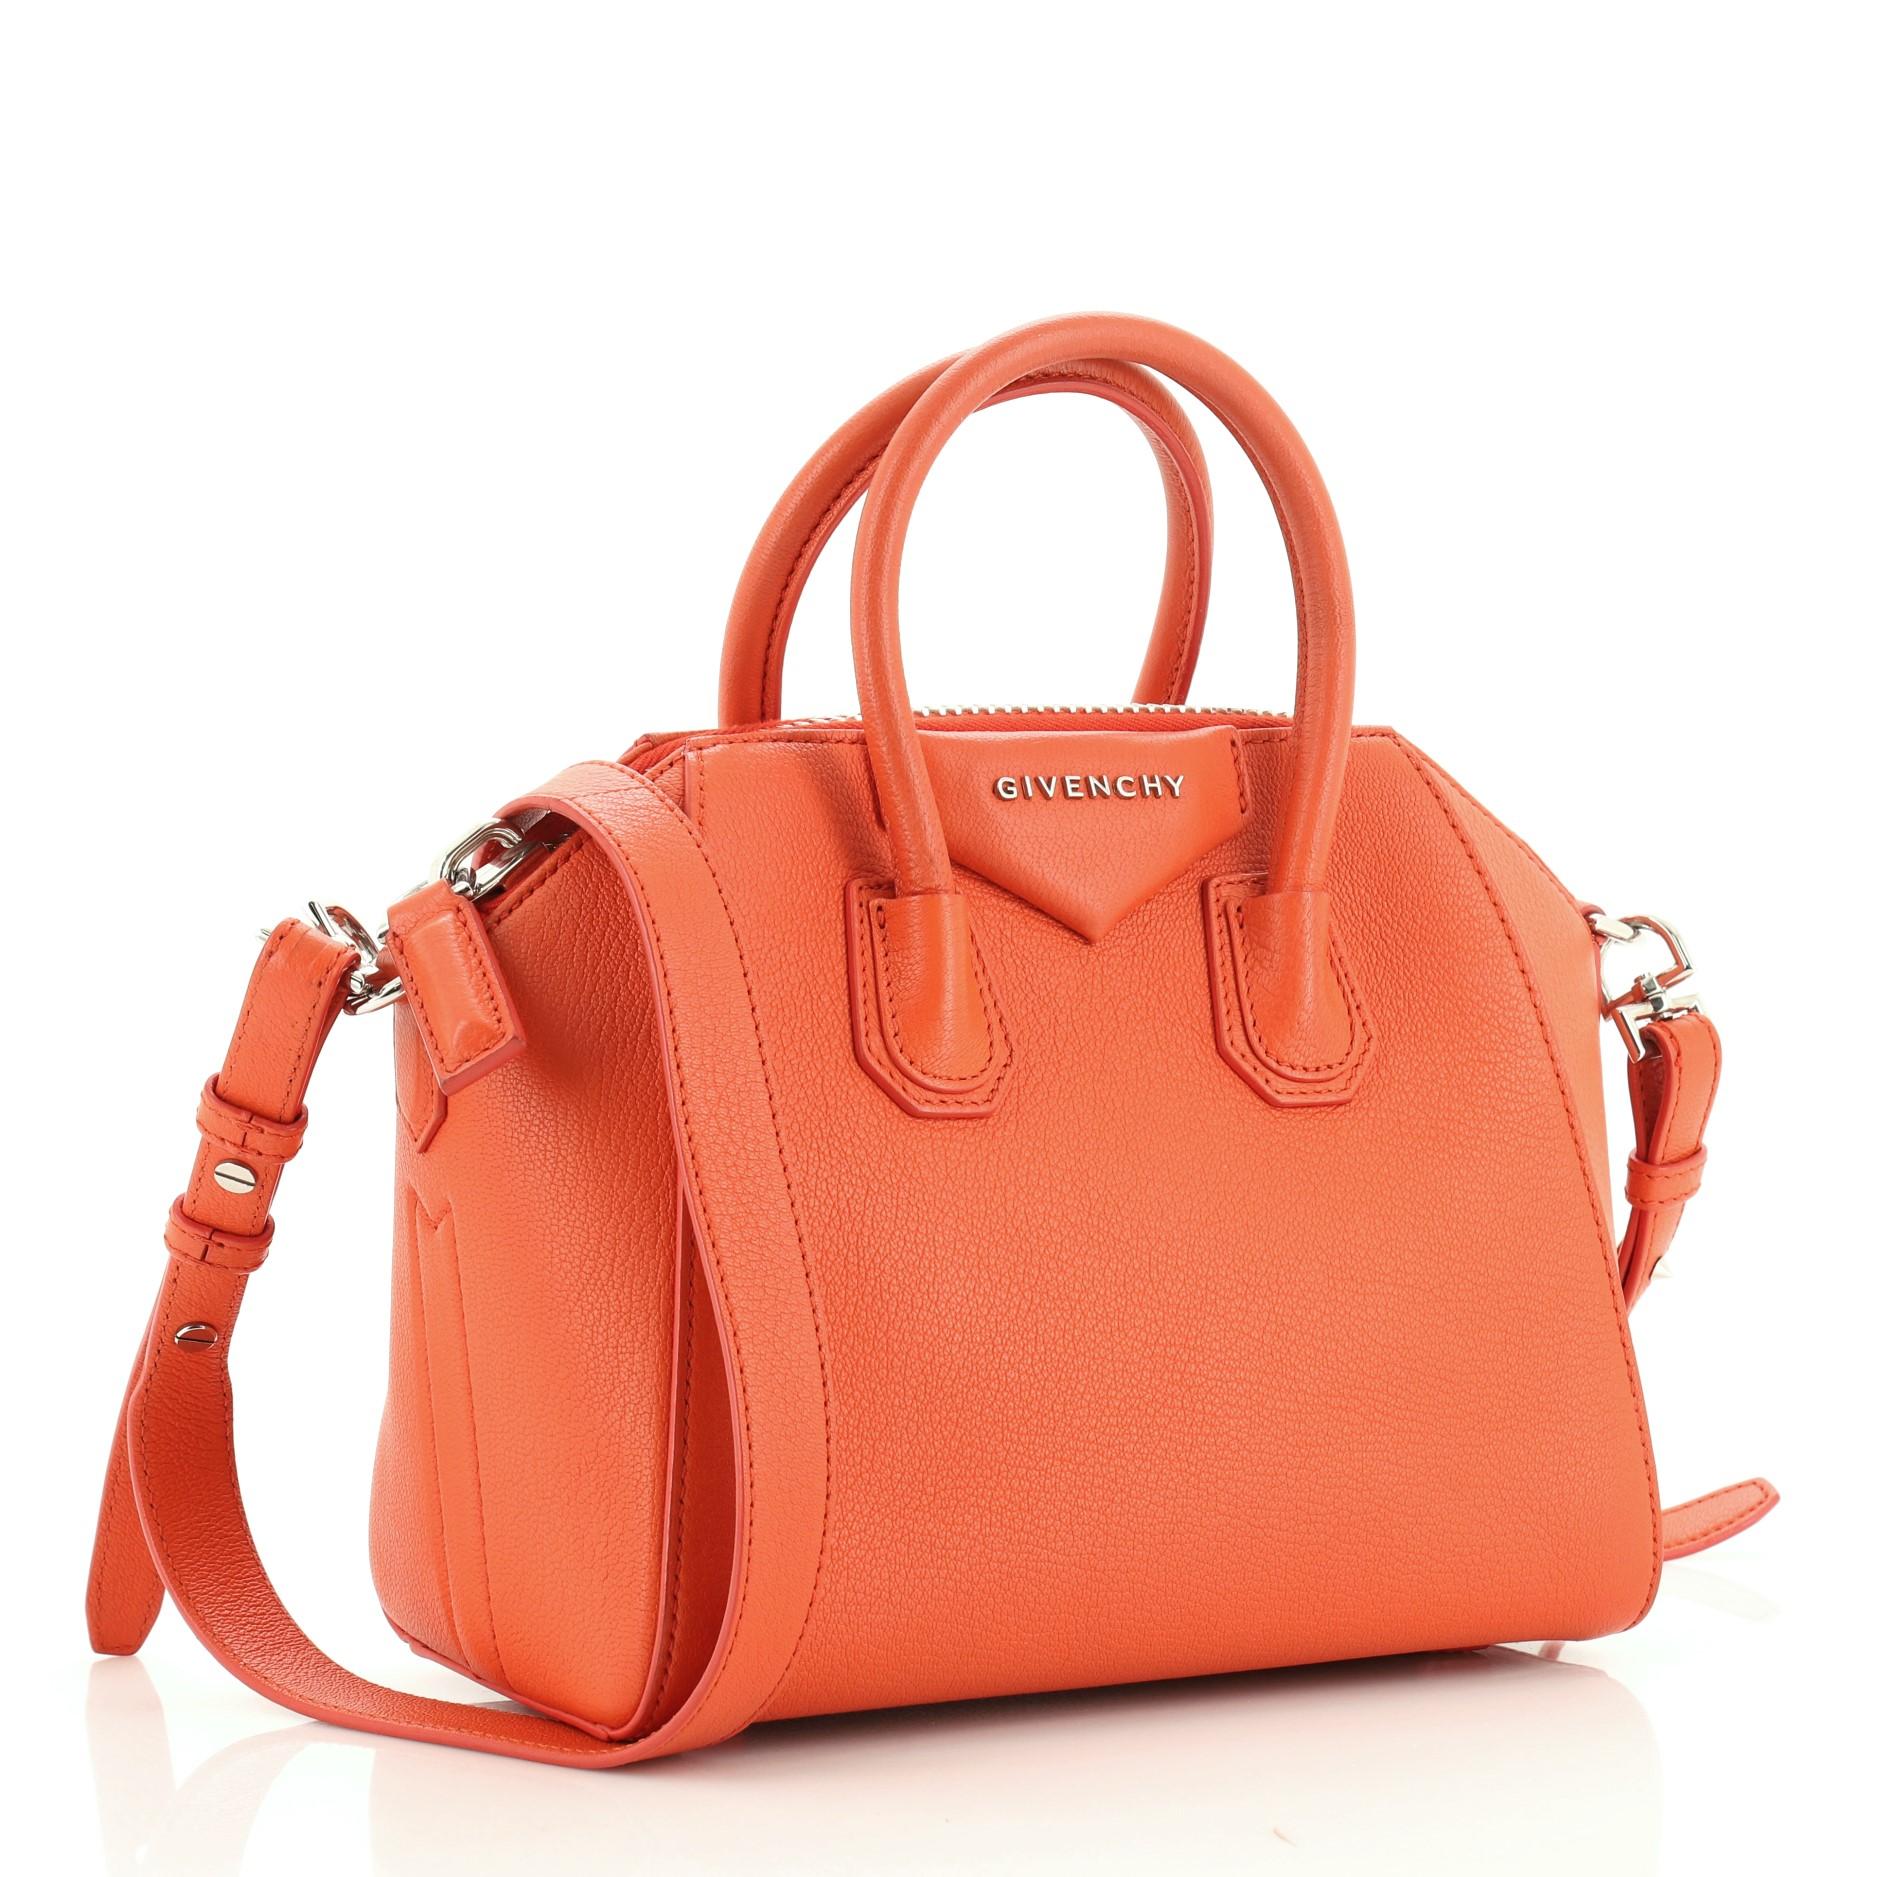 This Givenchy Antigona Bag Leather Mini, crafted from orange leather, features dual rolled leather handles and silver-tone hardware. Its zip closure opens to a neutral fabric interior with zip and slip pockets. These are professional pictures of the